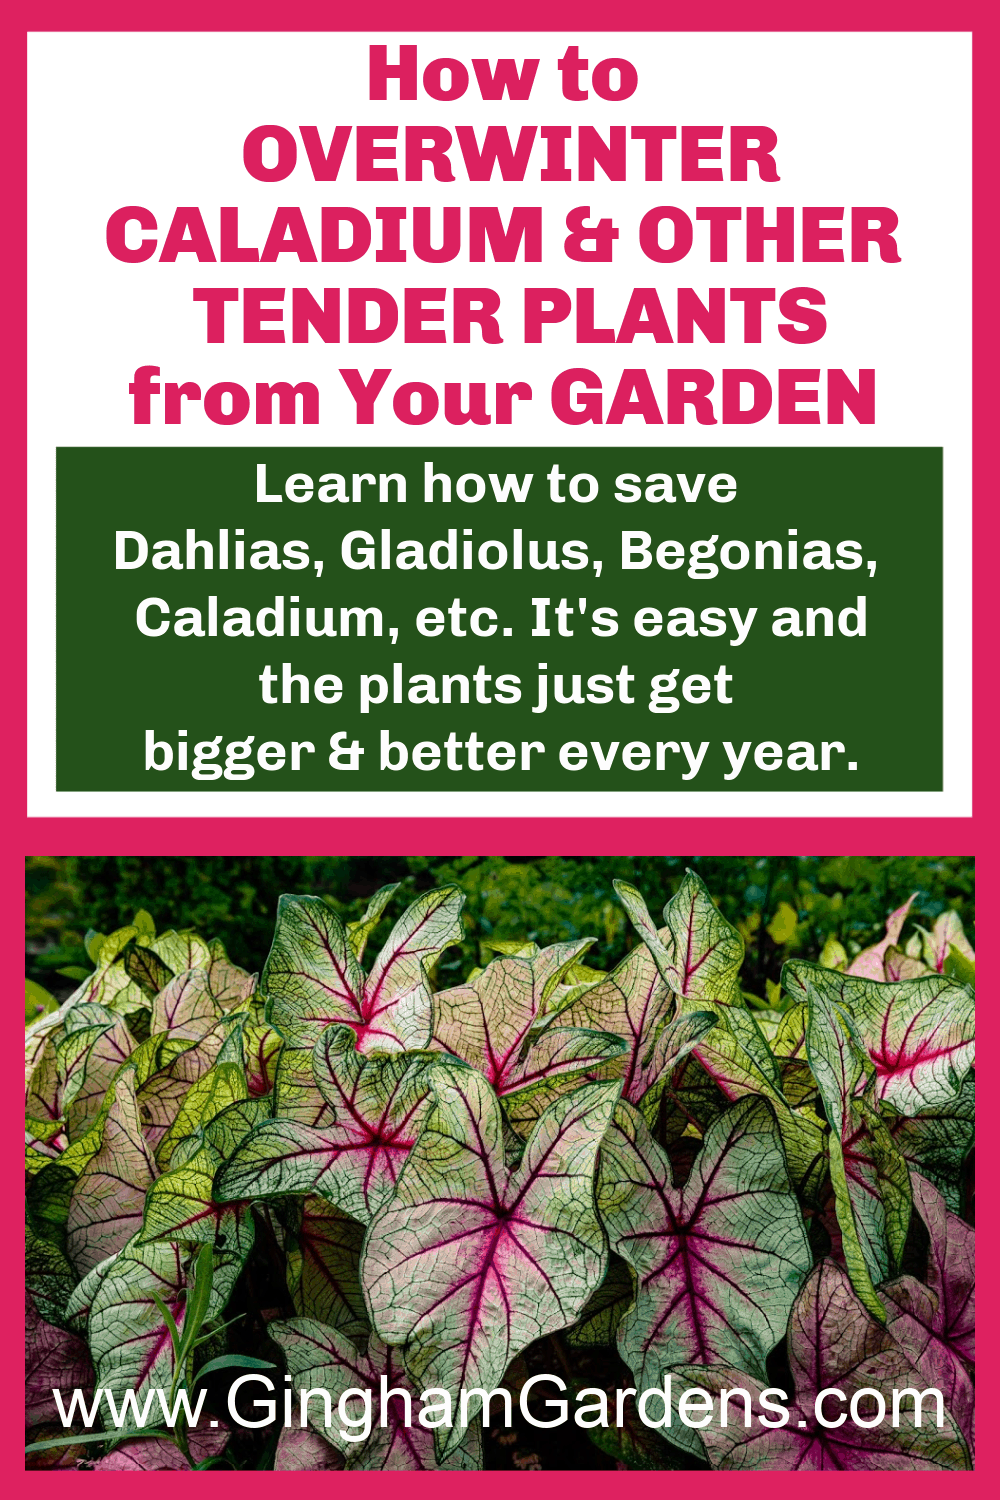 Image of Caladium plants with text overlay - How to Overwinter Caladium and other tender plants from Your Garden